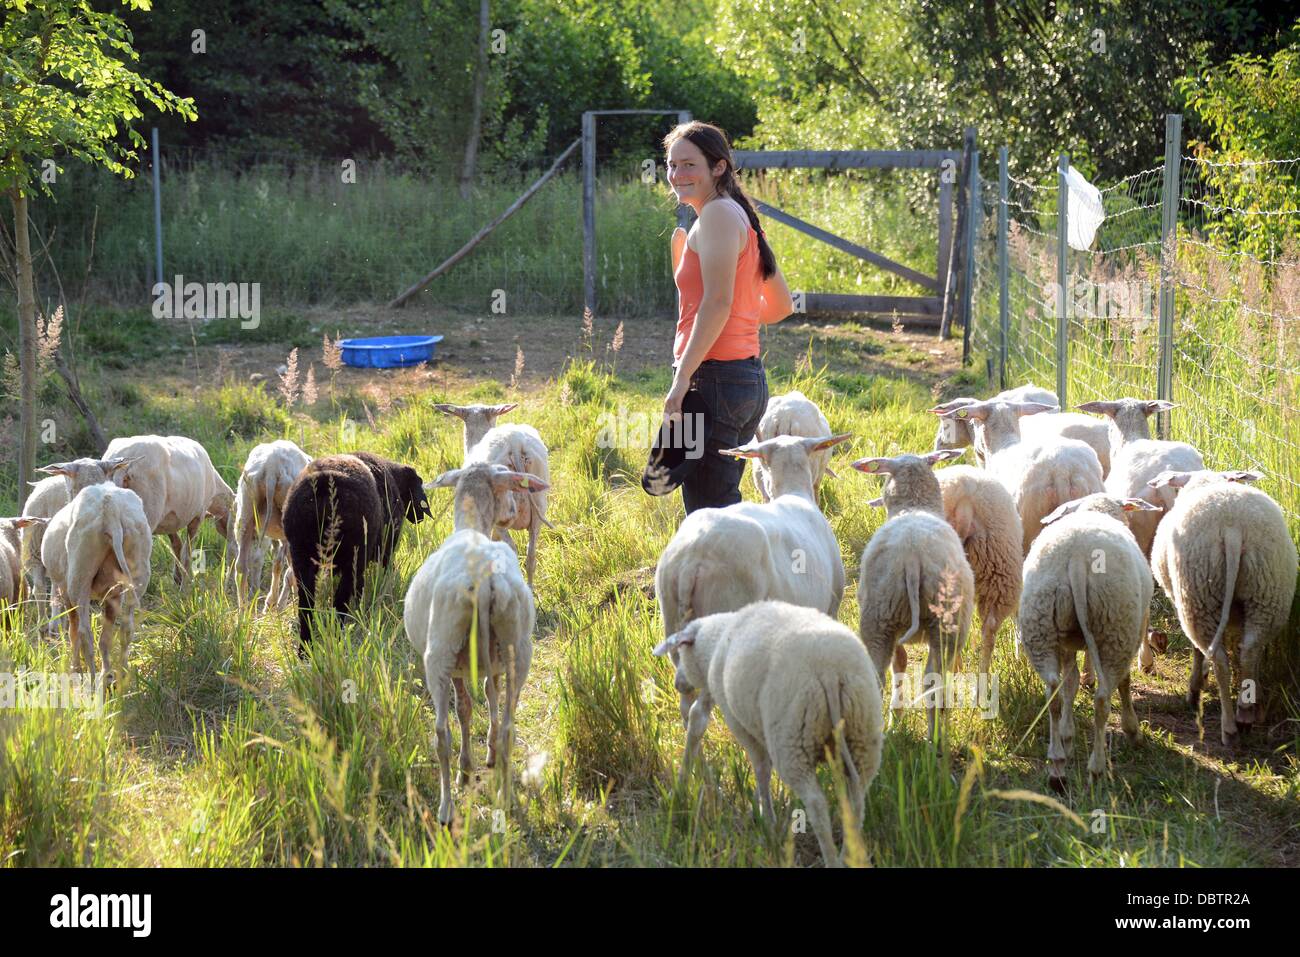 Leipzig, Germany. 08th July, 2013. The city shepherd Kerstin Doppelstein is pictured with her flock of sheep on a pasture at Cospudener Lake in Leipzig, Germany, 08 July 2013. Photo: Waltraud Grubitzsch/dpa/Alamy Live News Stock Photo